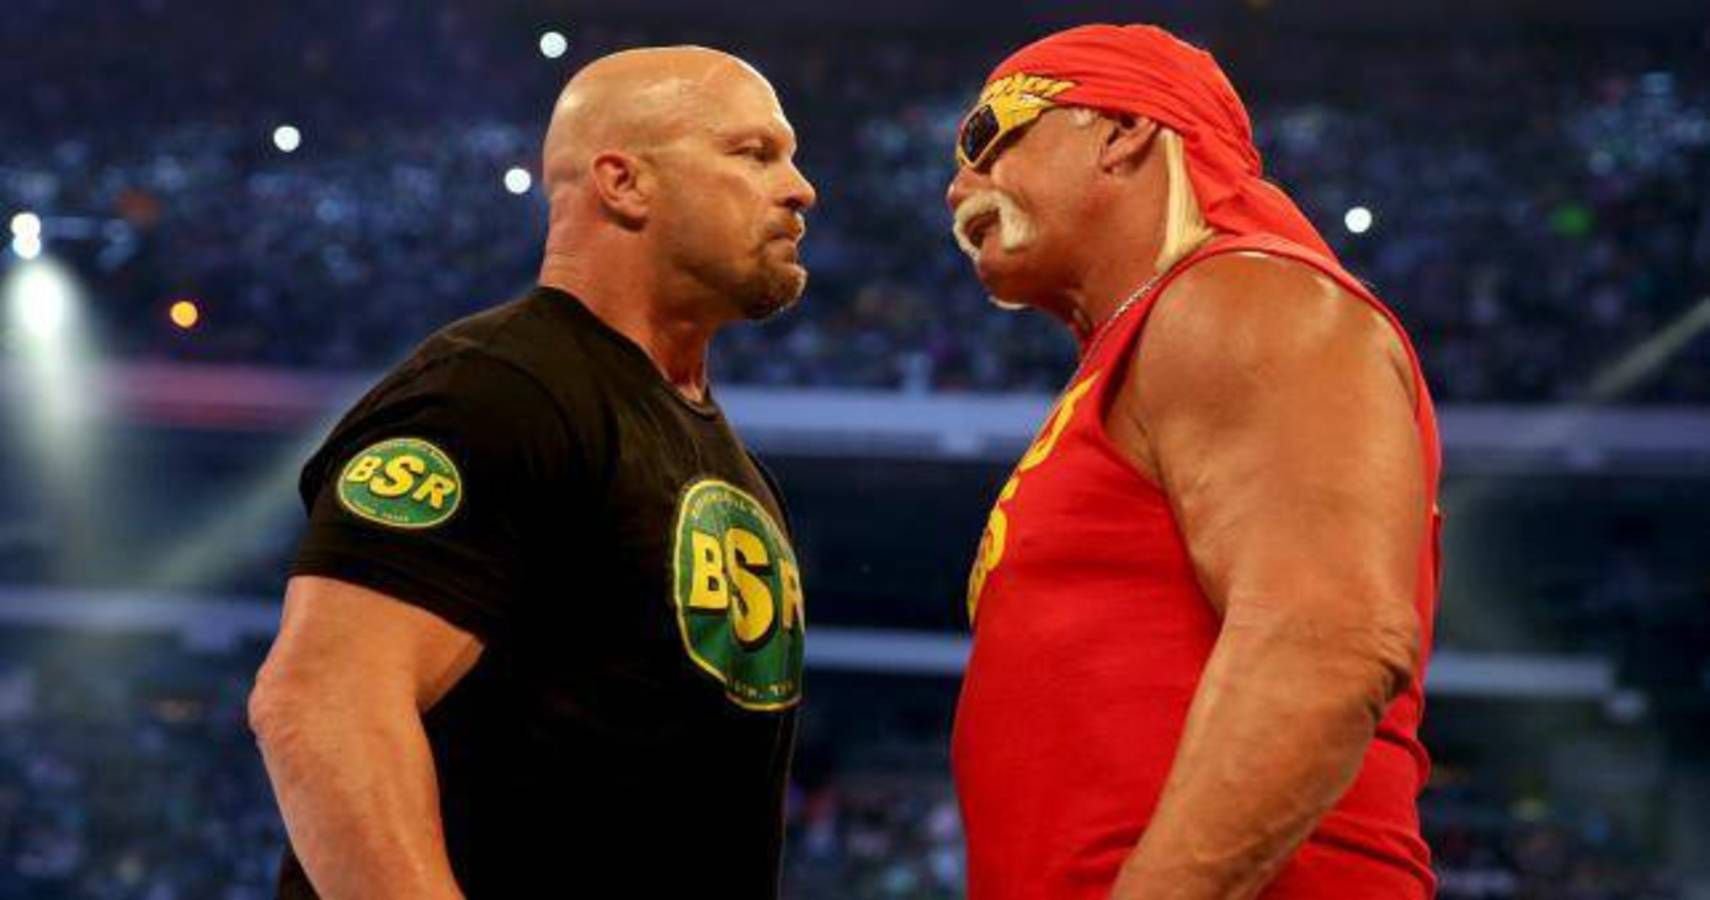 Hulk Hogan Wanted To Put Steve Austin Over After Returning To WWE